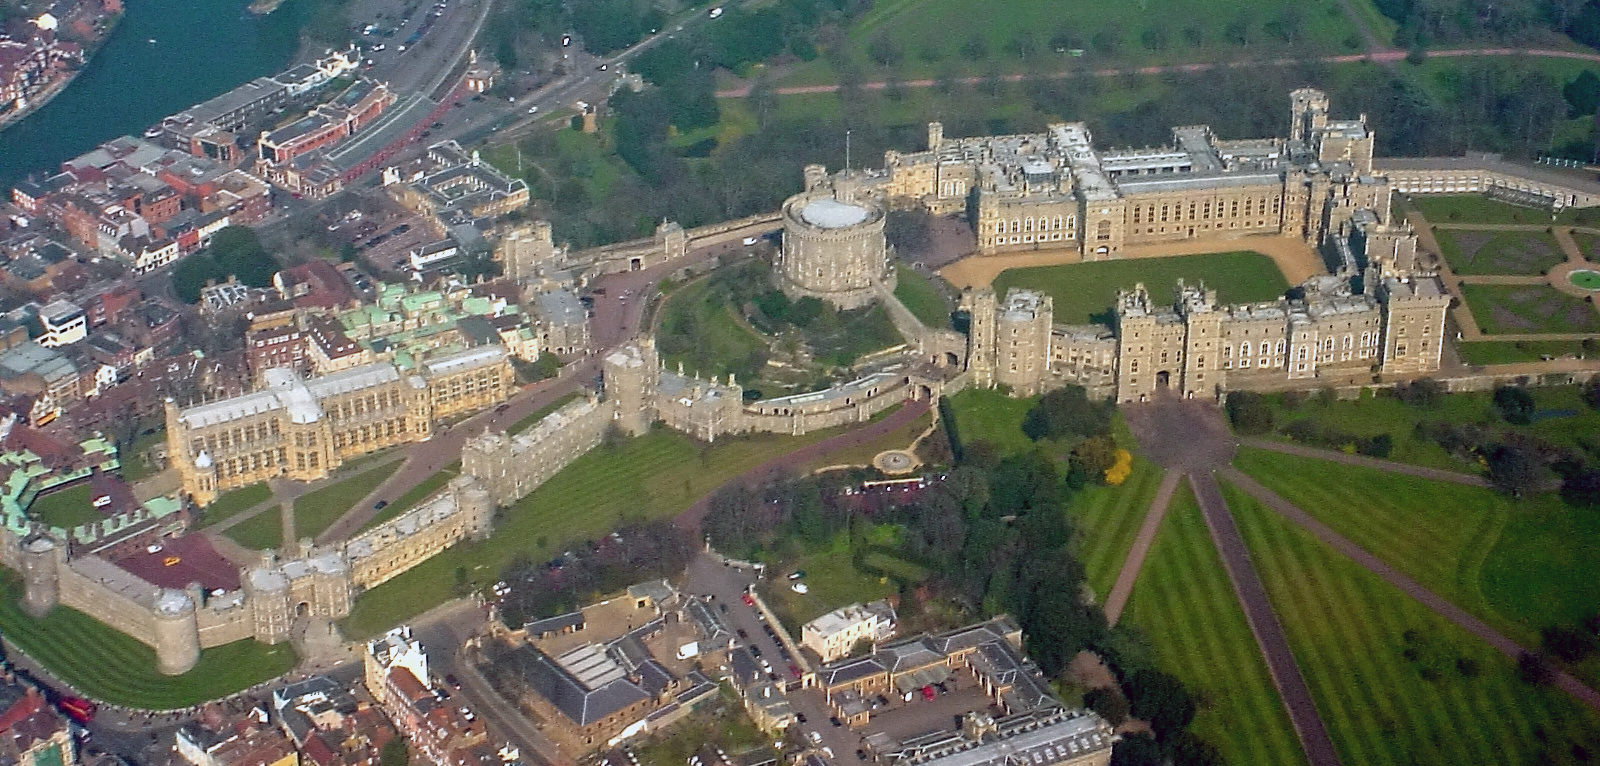 http://upload.wikimedia.org/wikipedia/commons/b/b2/Windsor_Castle_from_the_Air_wideangle.jpg